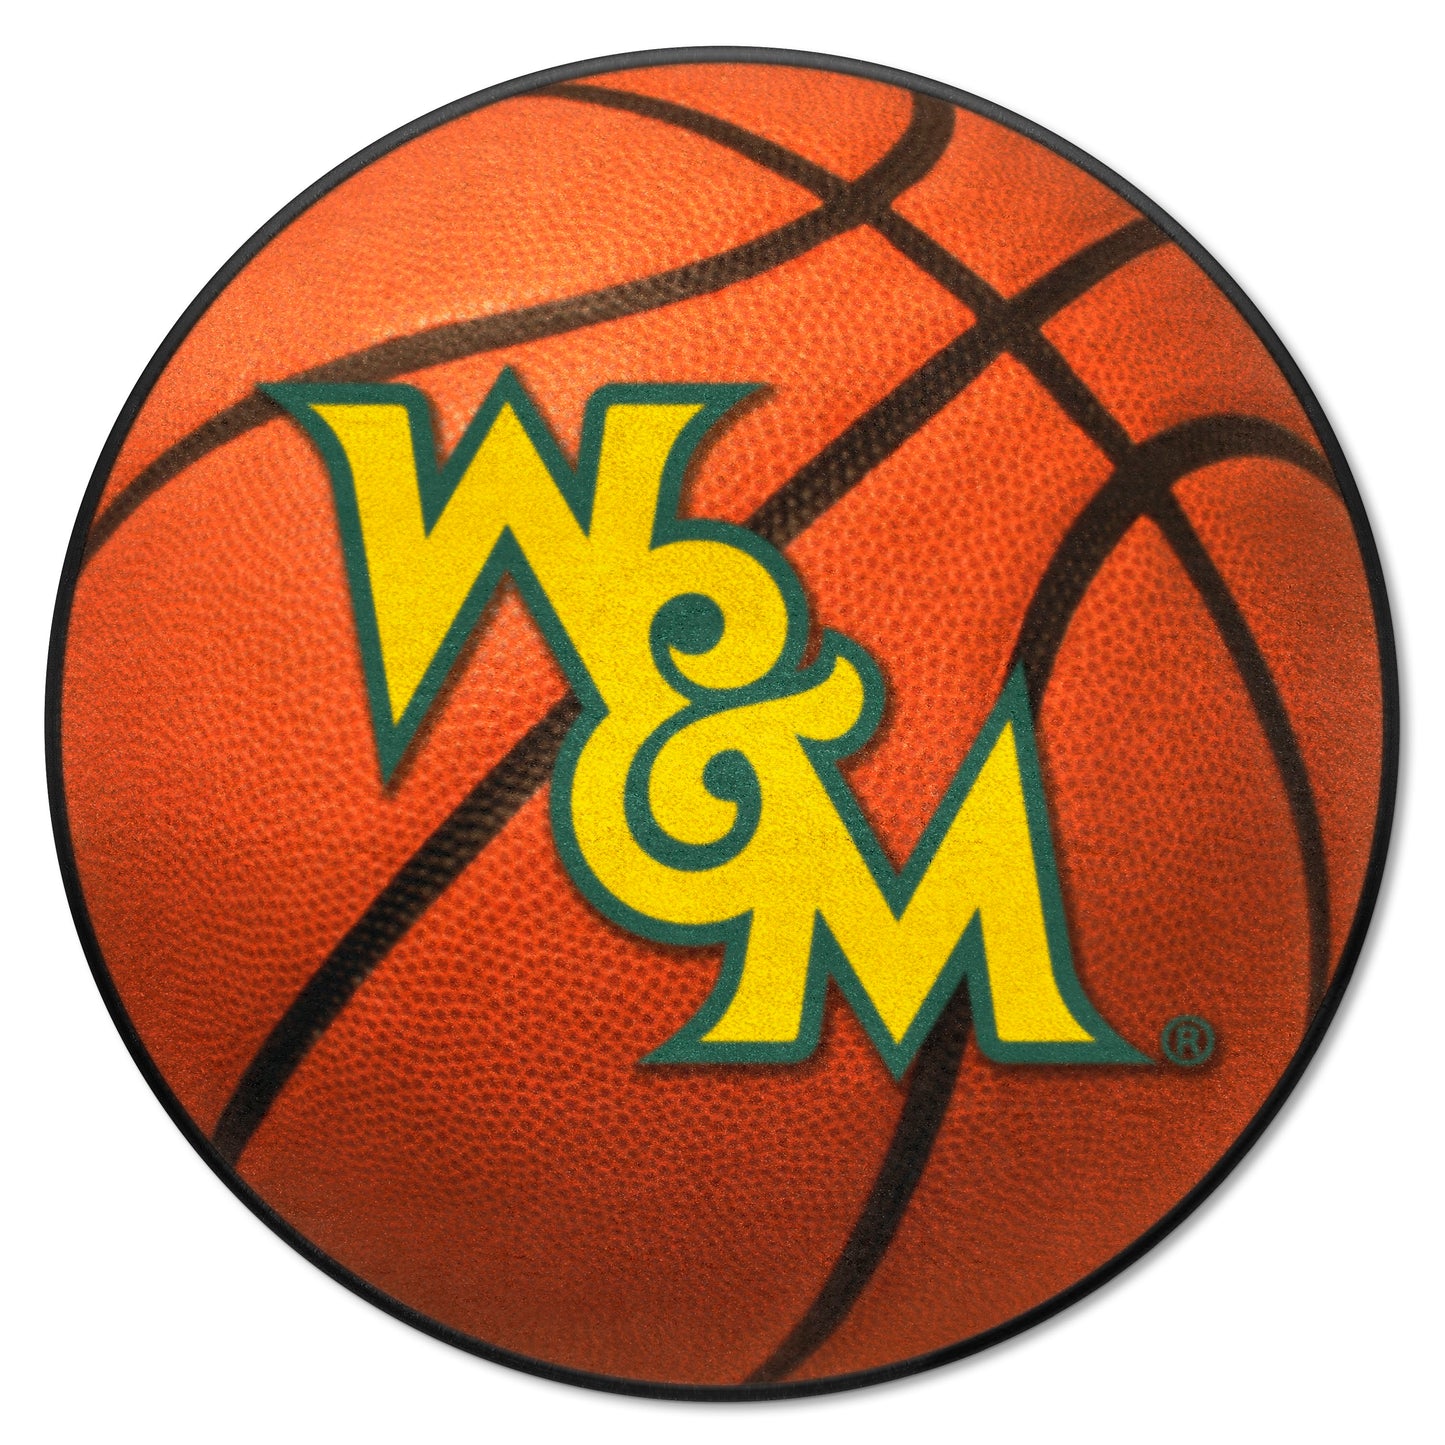 William & Mary Tribe Basketball Rug - 27in. Diameter